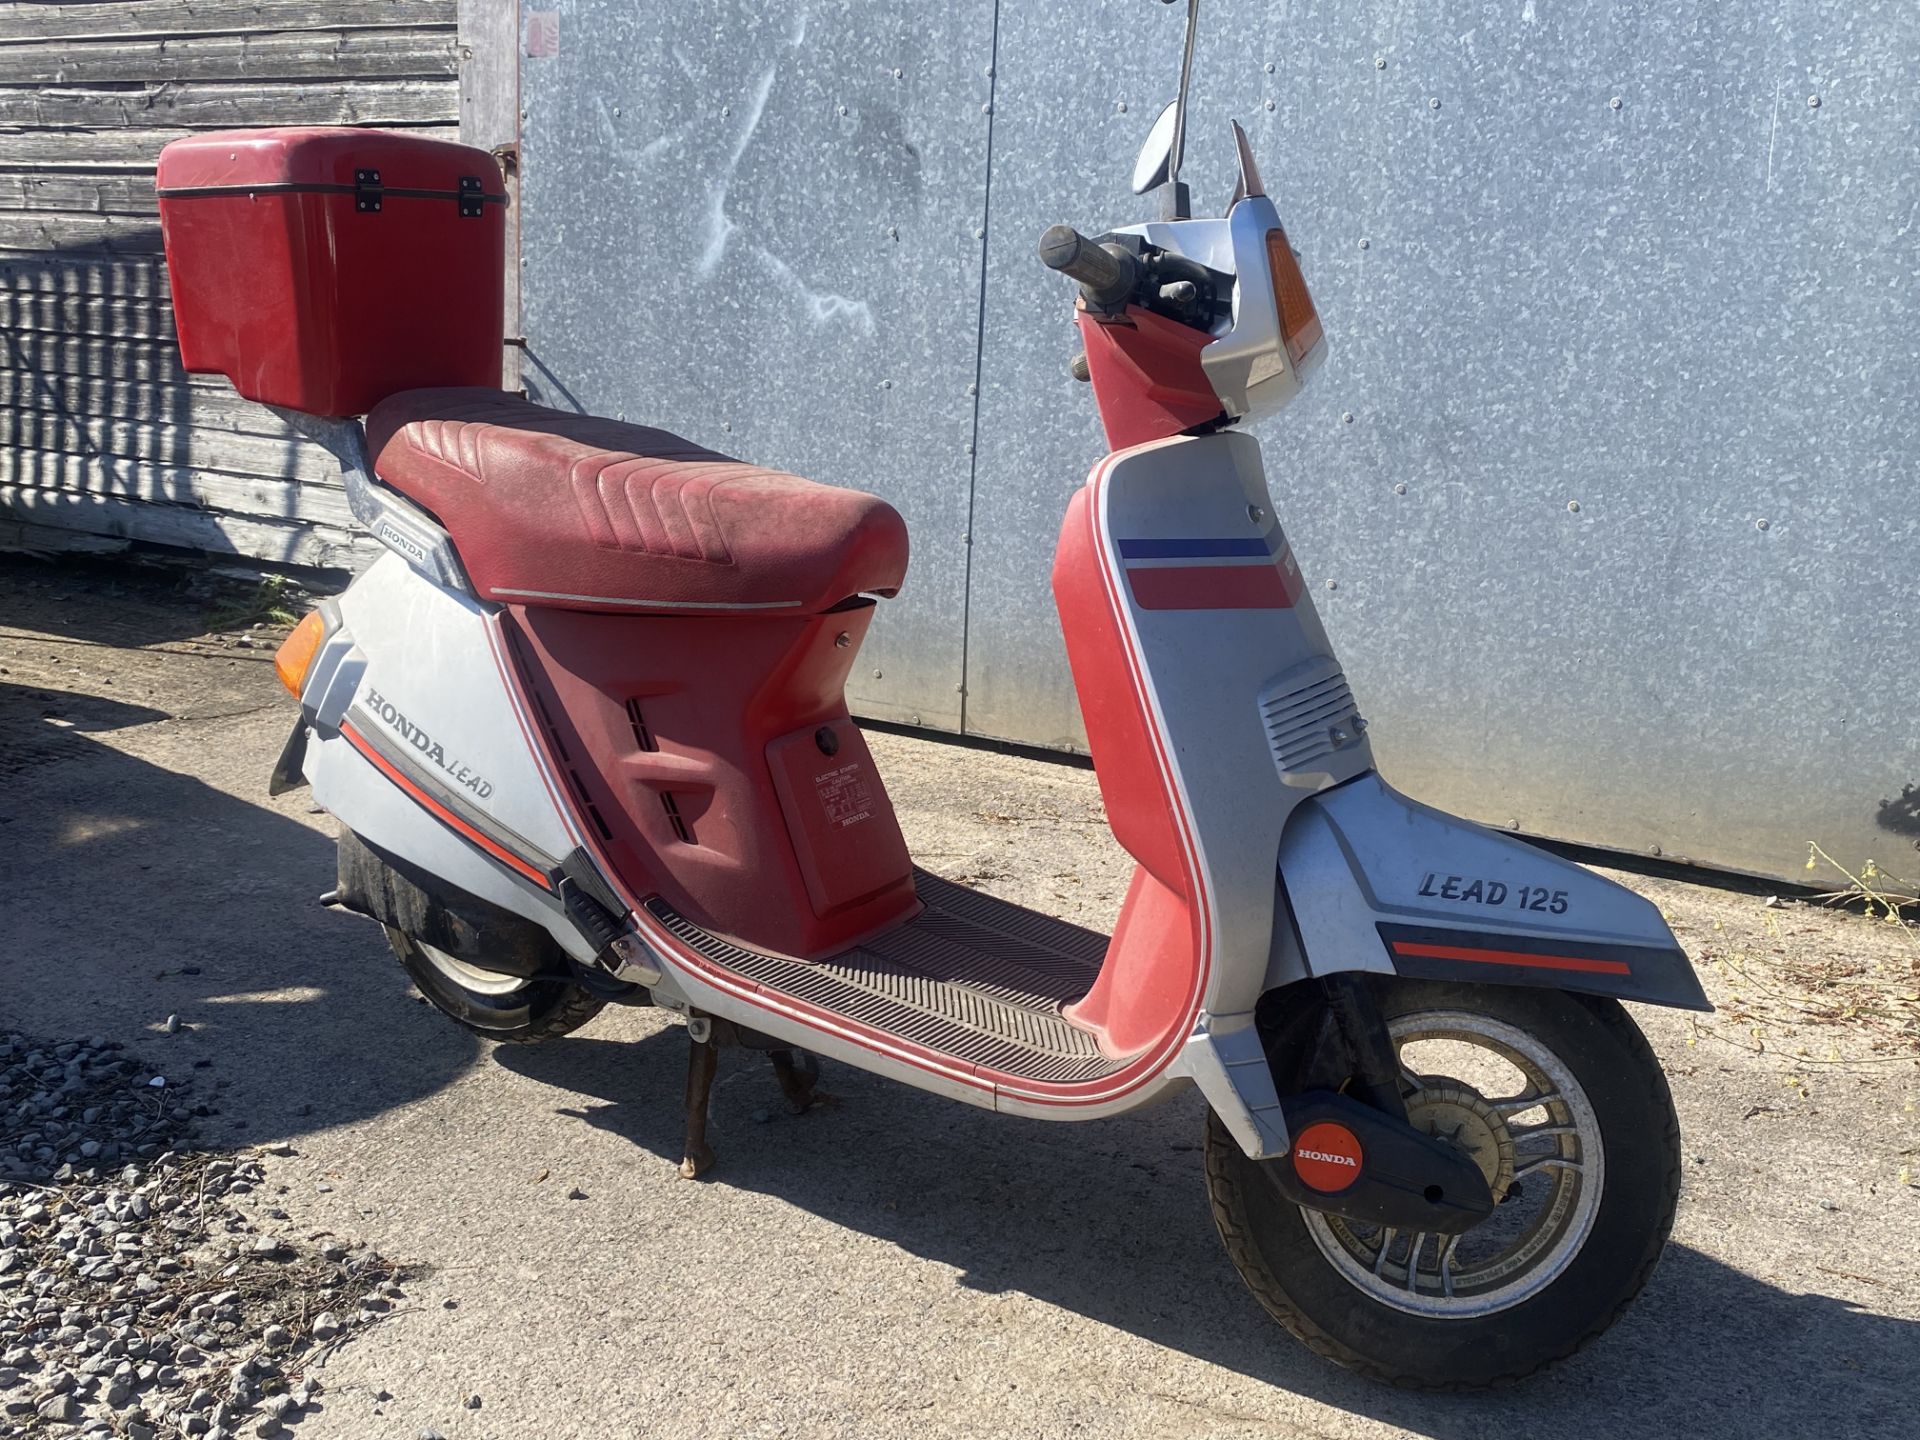 1983 HONDA LEAD 125 Scooter ONLY 765 miles BARNFIND LOCATION Co.Down N.Ireland - Image 2 of 5